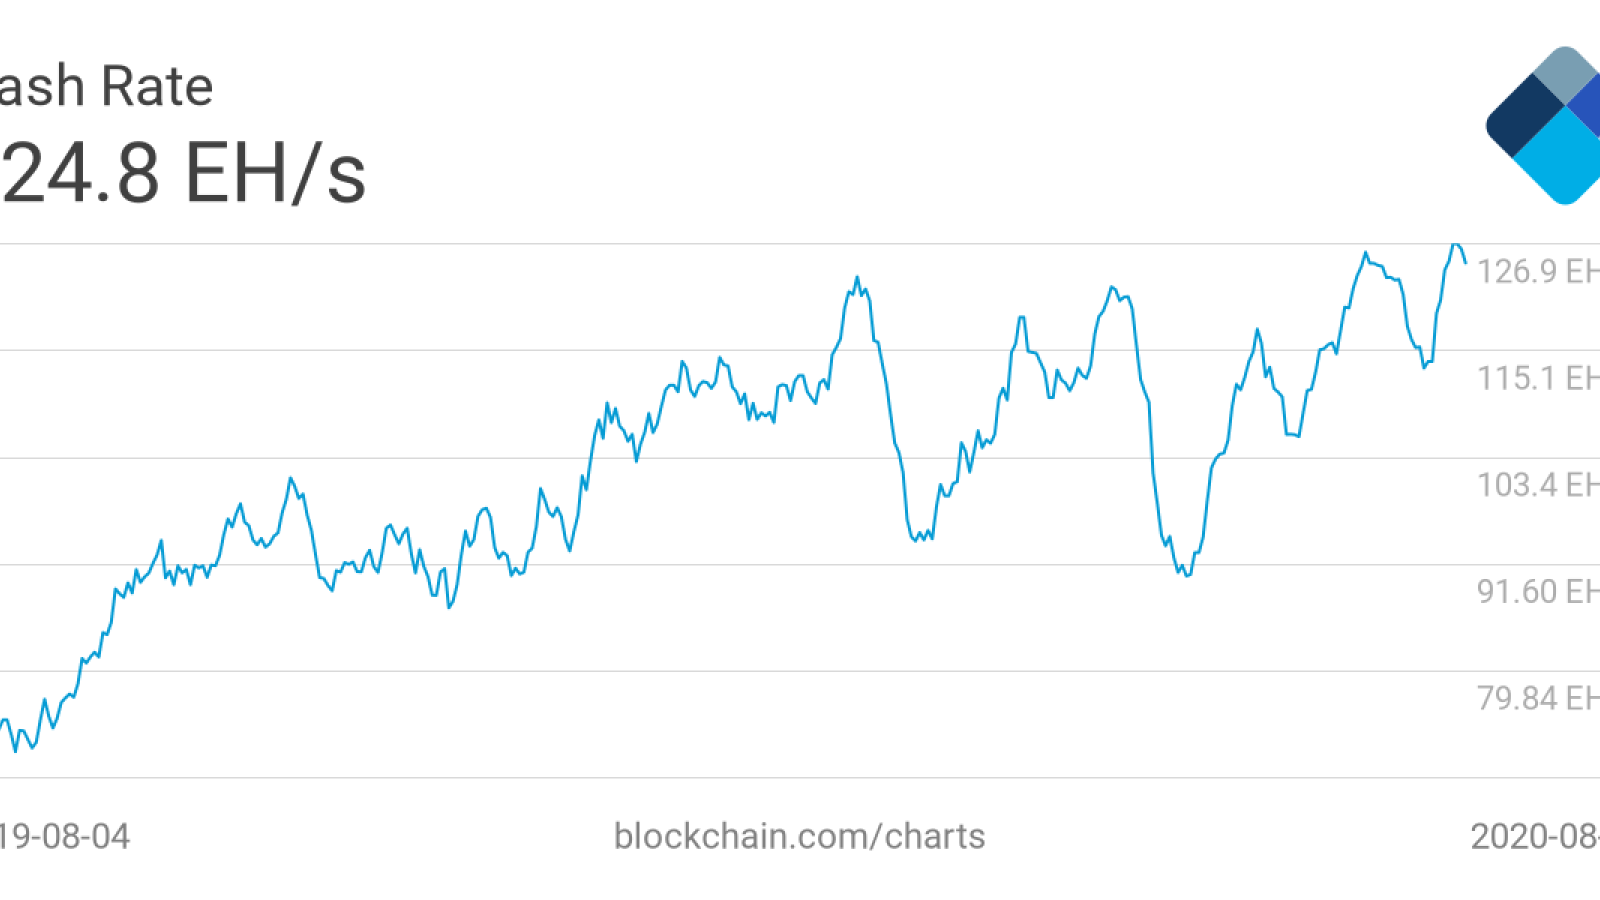 The total hashrate of the Bitcoin blockchain